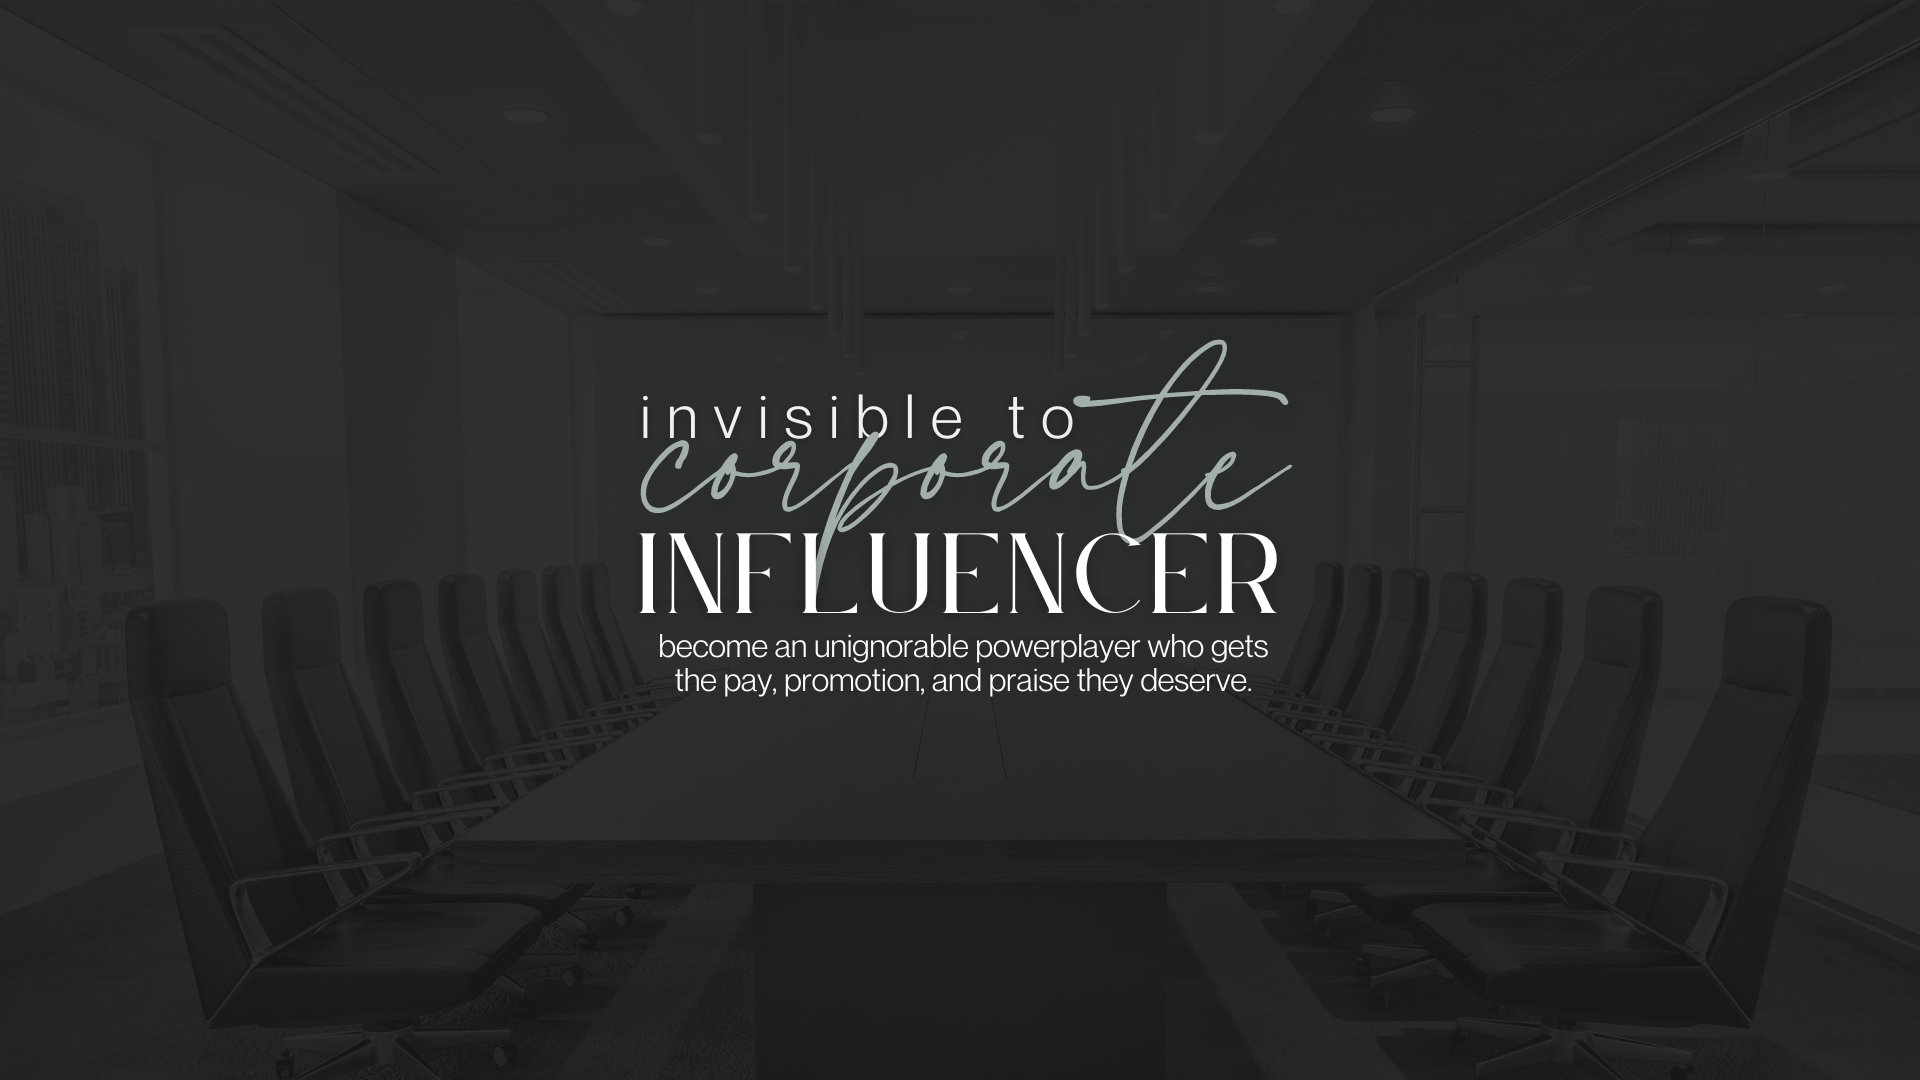 Invisible to Corporate Influencers: become an unignoreable power player who gets the pay, promotion, and praise they deserve